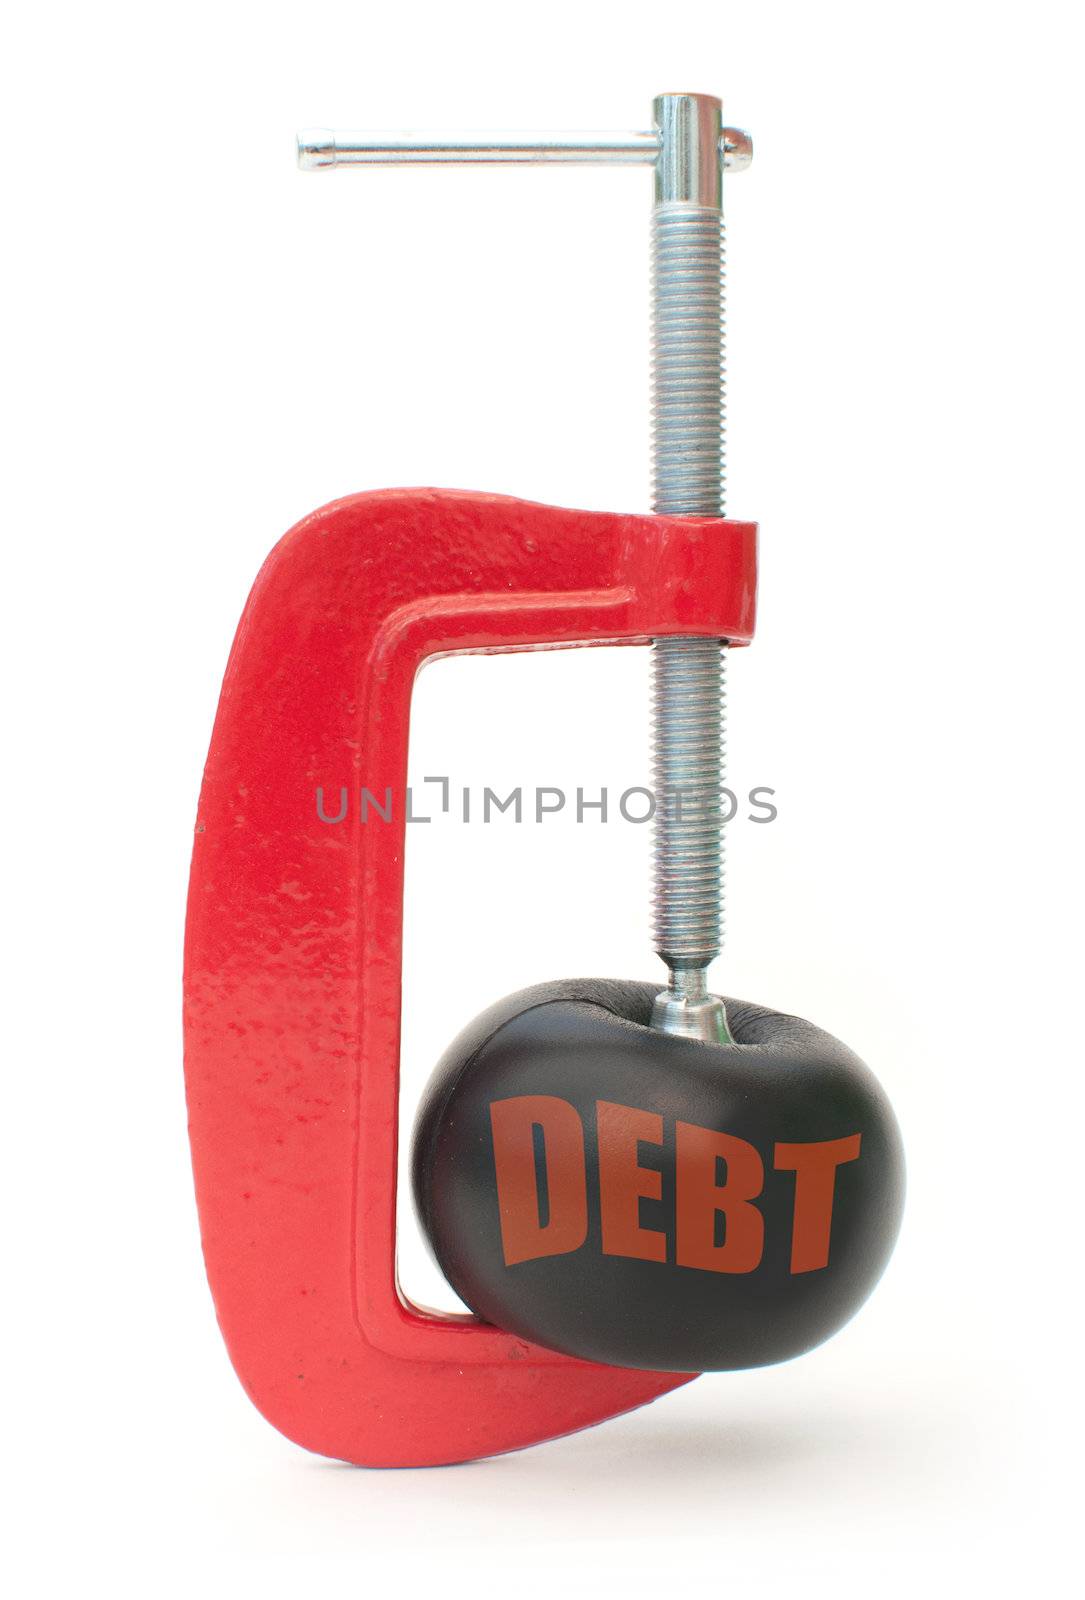 Clamp tool squeezing a ball labeled with debt 